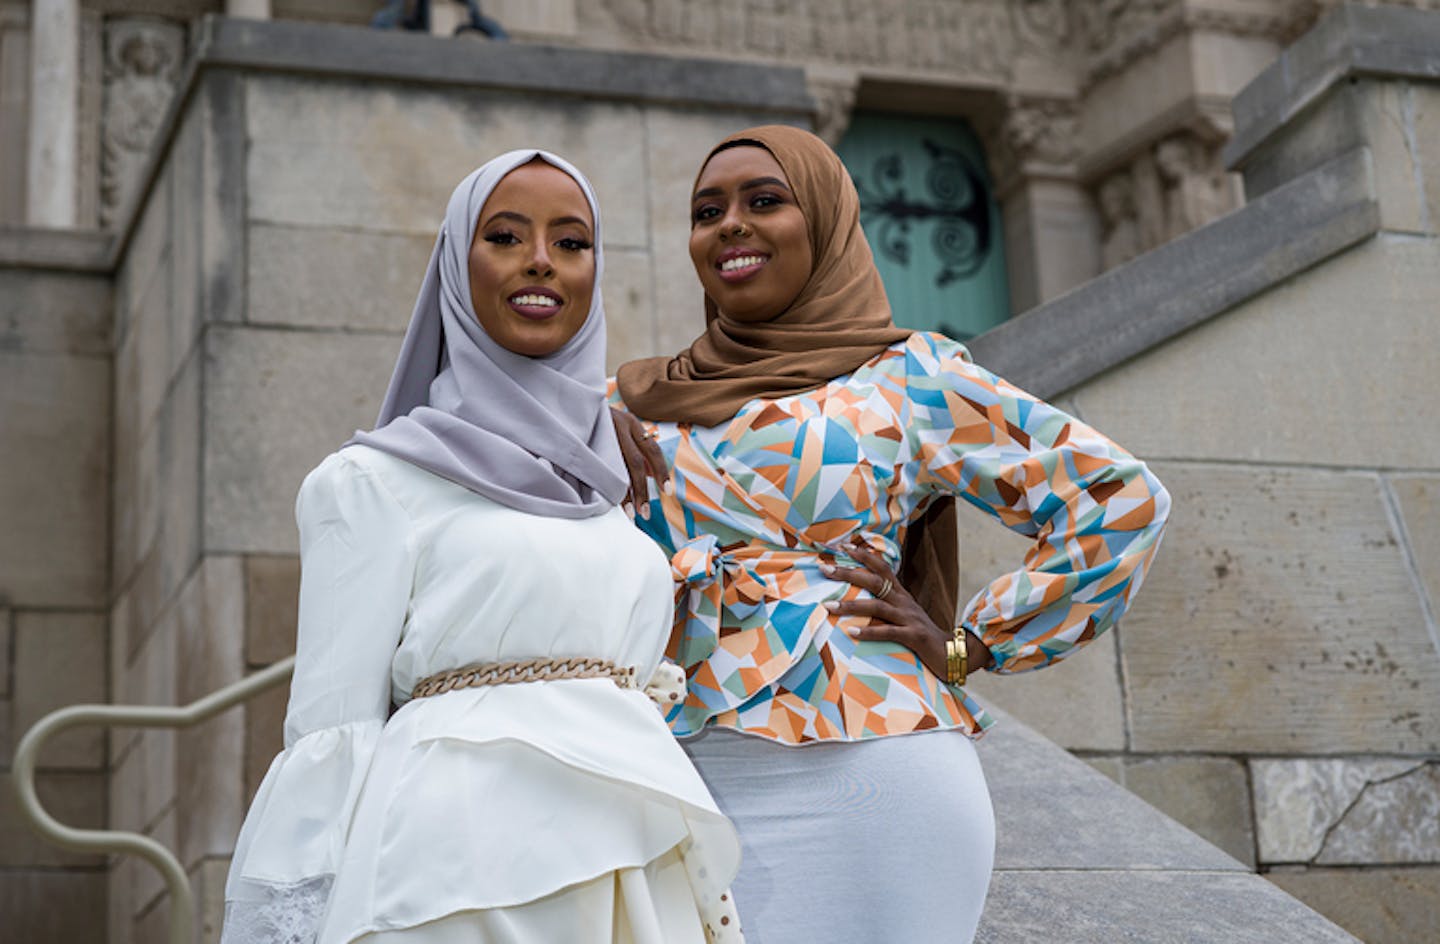 Two Black Women Created FDA-Compliant Disposable Protective Hijabs